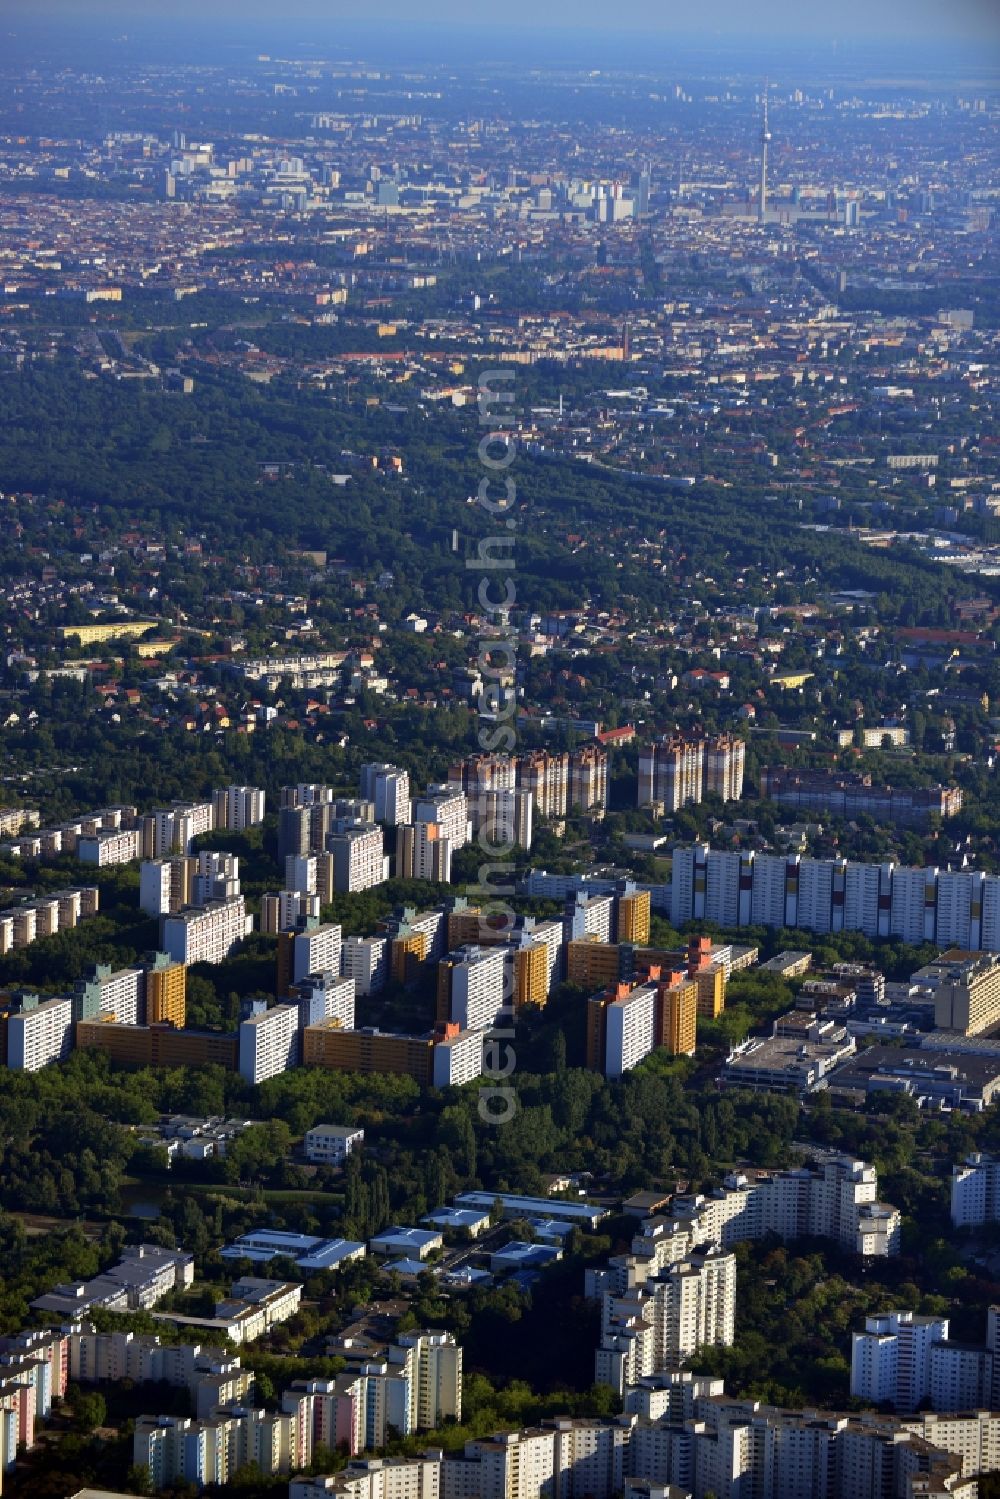 Berlin OT Märkisches Viertel from above - View of apartment buildings in the housing complex of Maerkisches Viertel in Berlin